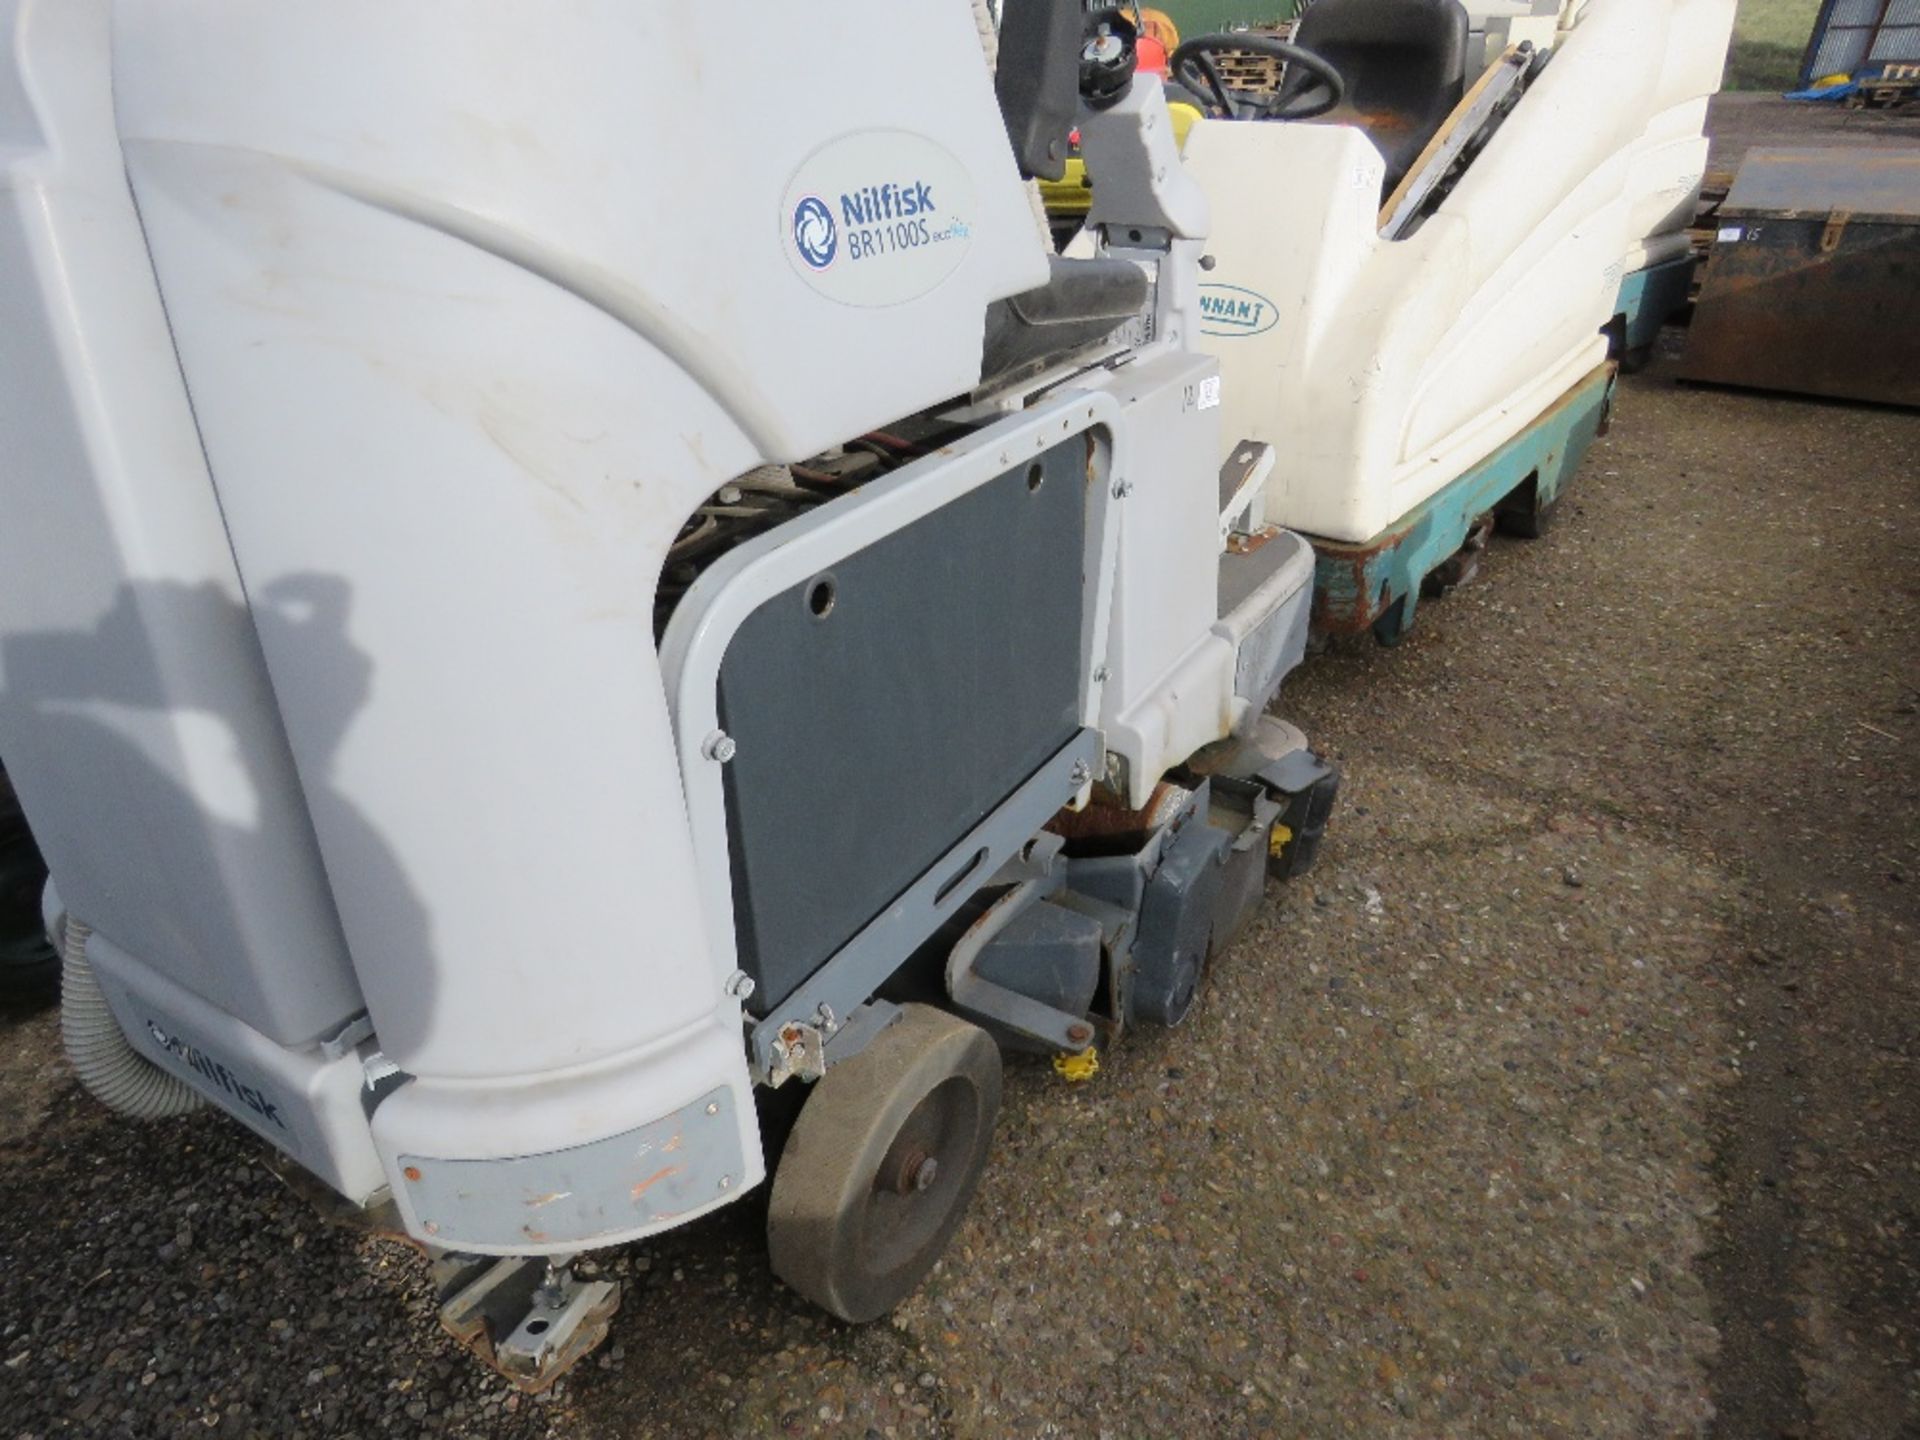 NILFISK BR1100S RIDE ON SWEEPER WITH BATTERIES. SOURCED FROM SITE CLEARANCE CONDITION UNKNOWN. - Image 2 of 3